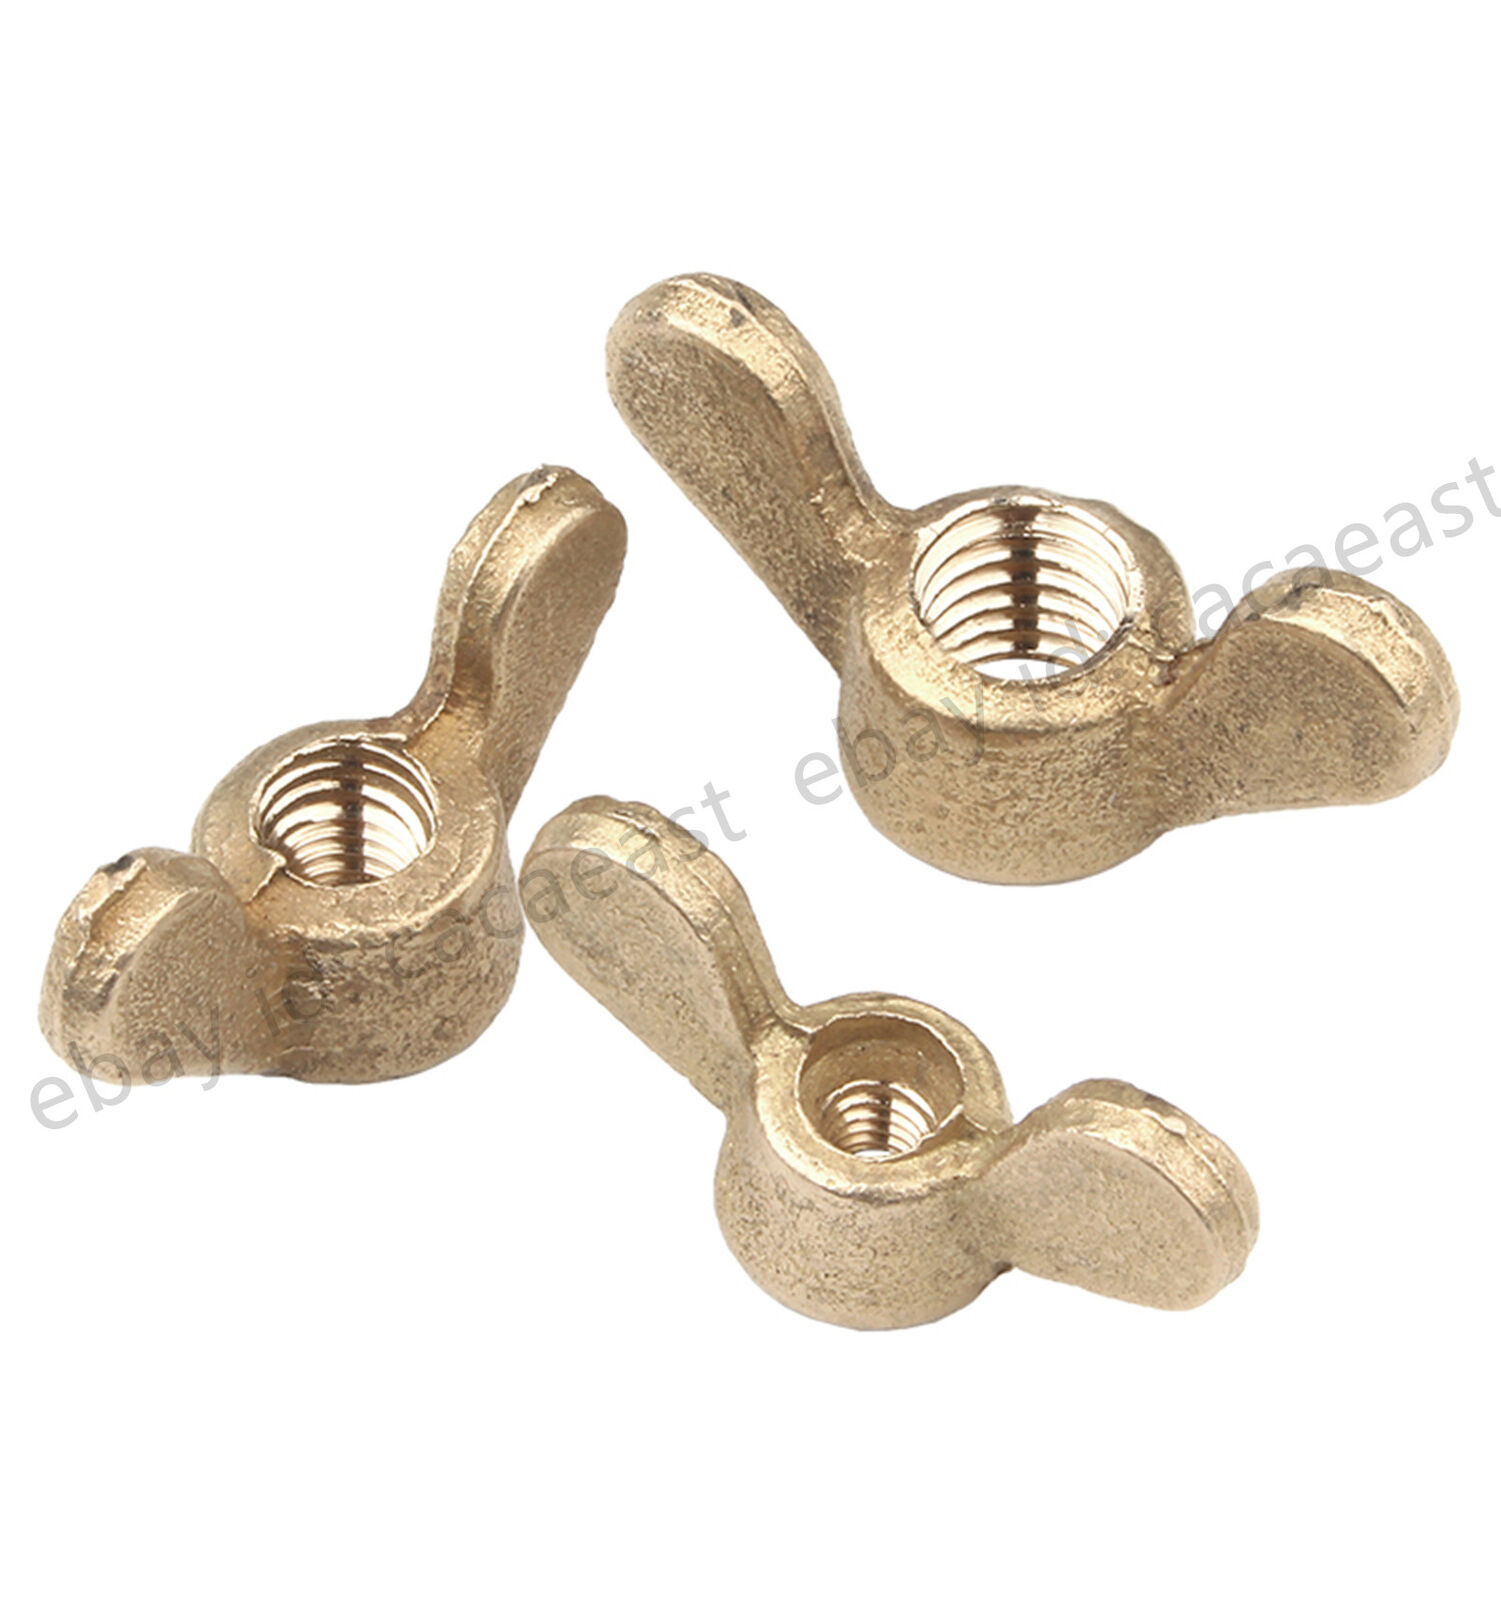 Wing Nuts Metric M3 M4 M5 M6 M8 ~M12 Brass Extra Large Wing Butterfly Wing Nuts